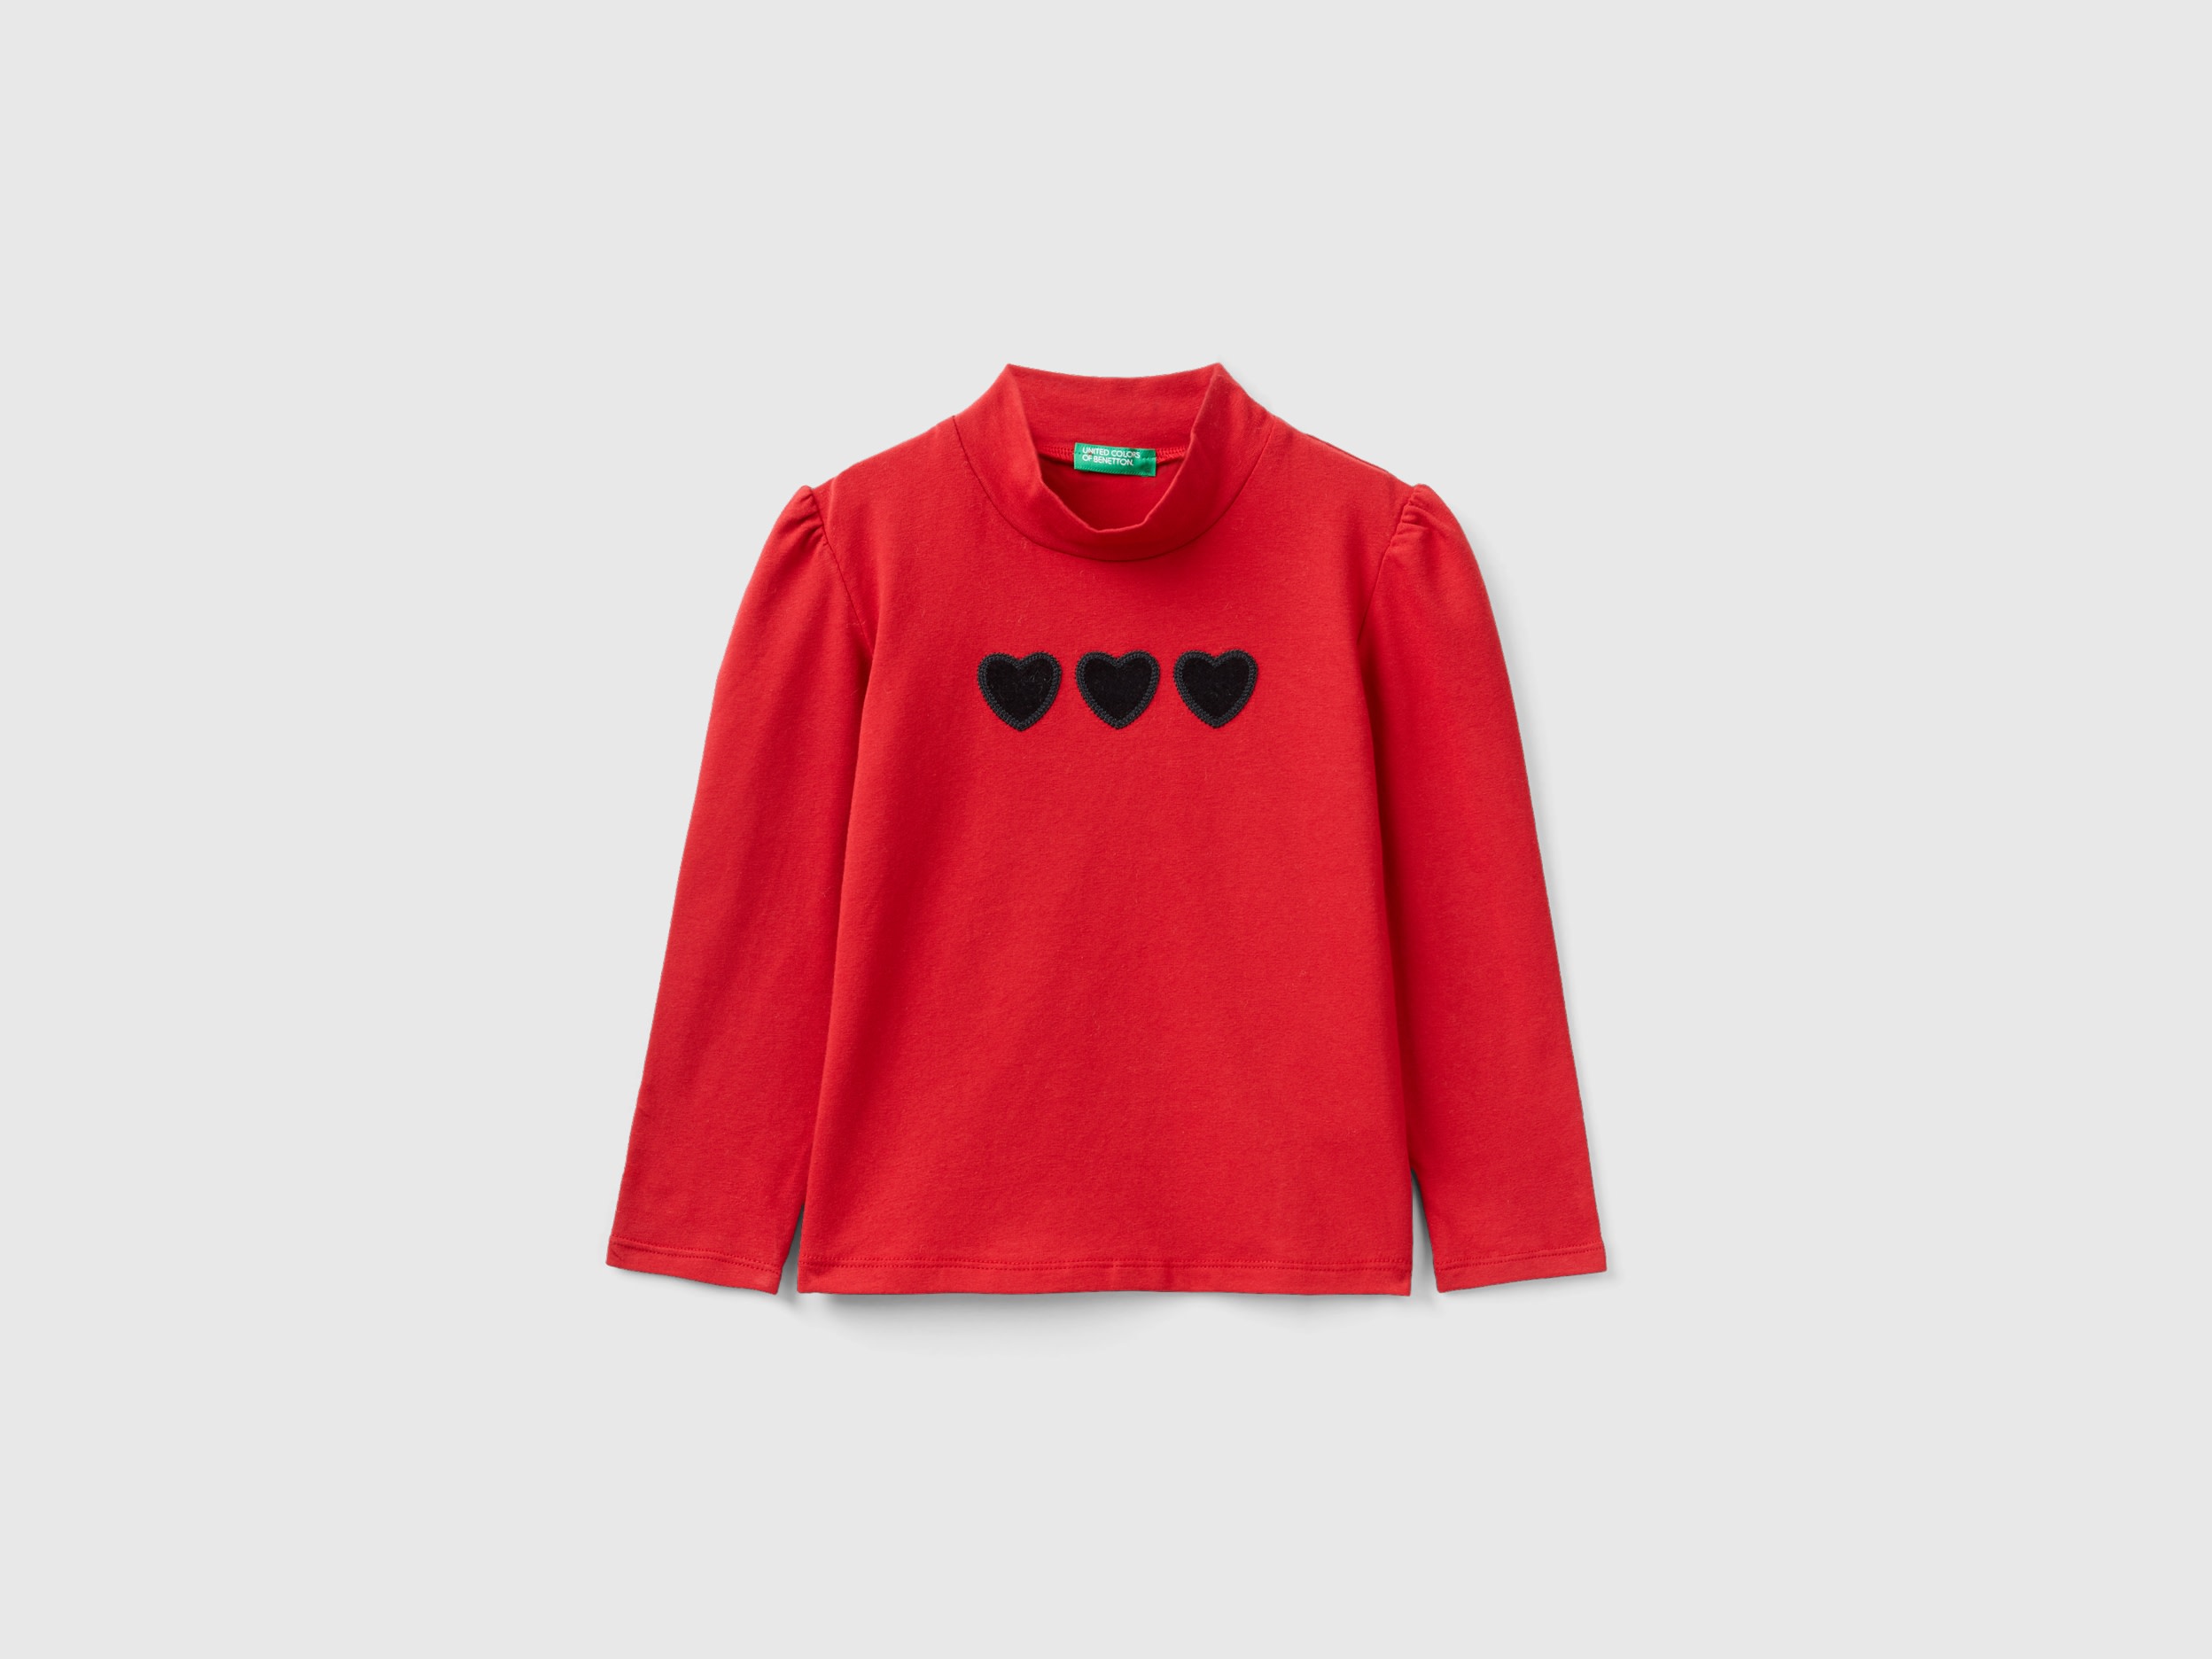 Benetton, T-shirt With Velvet Heart Patch, size 12-18, Red, Kids